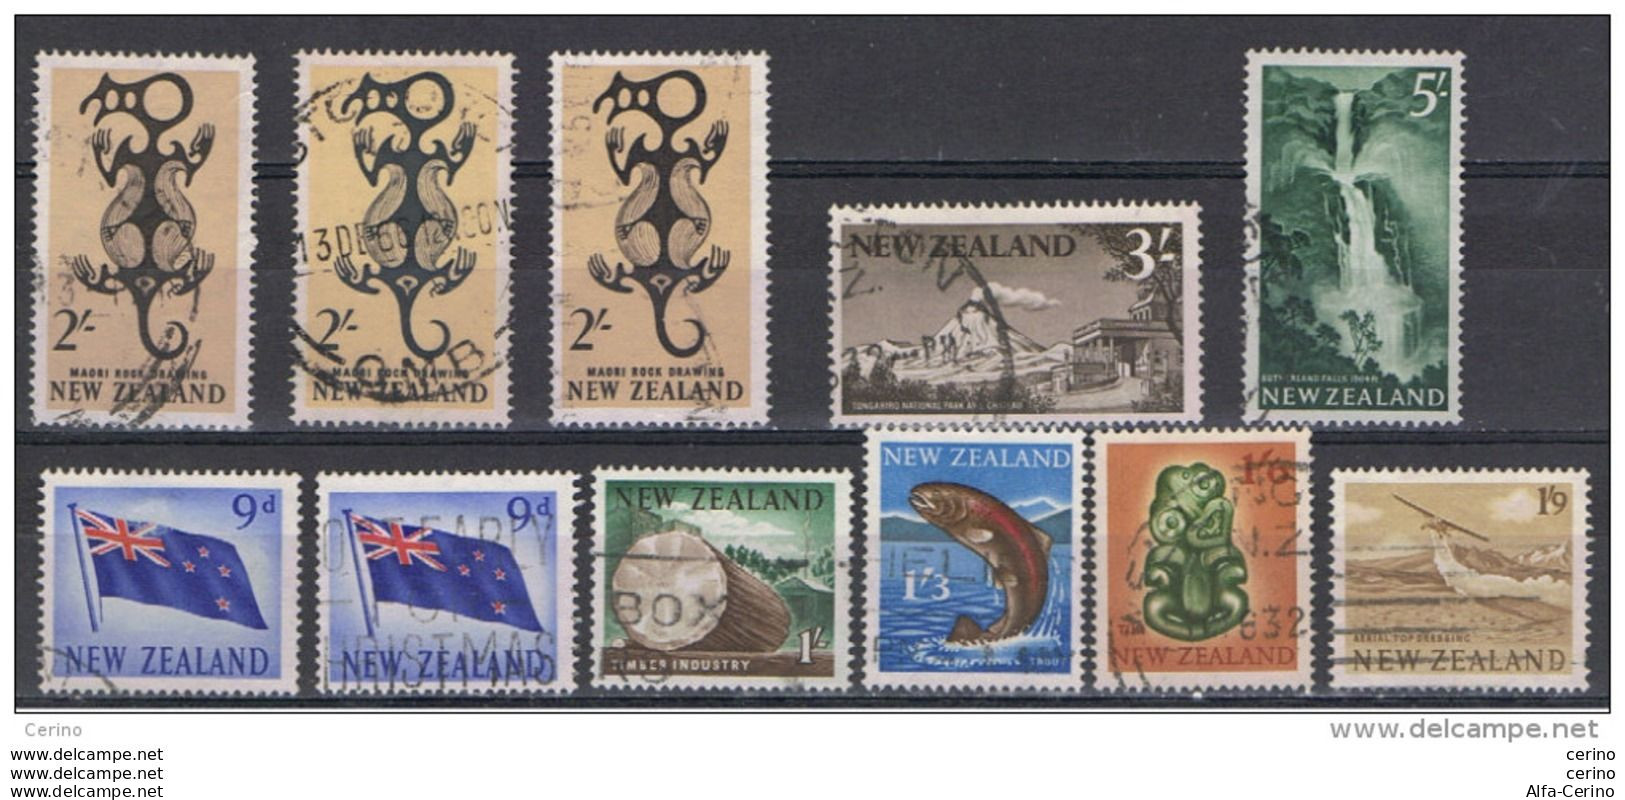 NEW  ZEALAND:  1960/62  LOT  11  USED  REP.  STAMPS  -  YV/TELL. 391//399 - Used Stamps